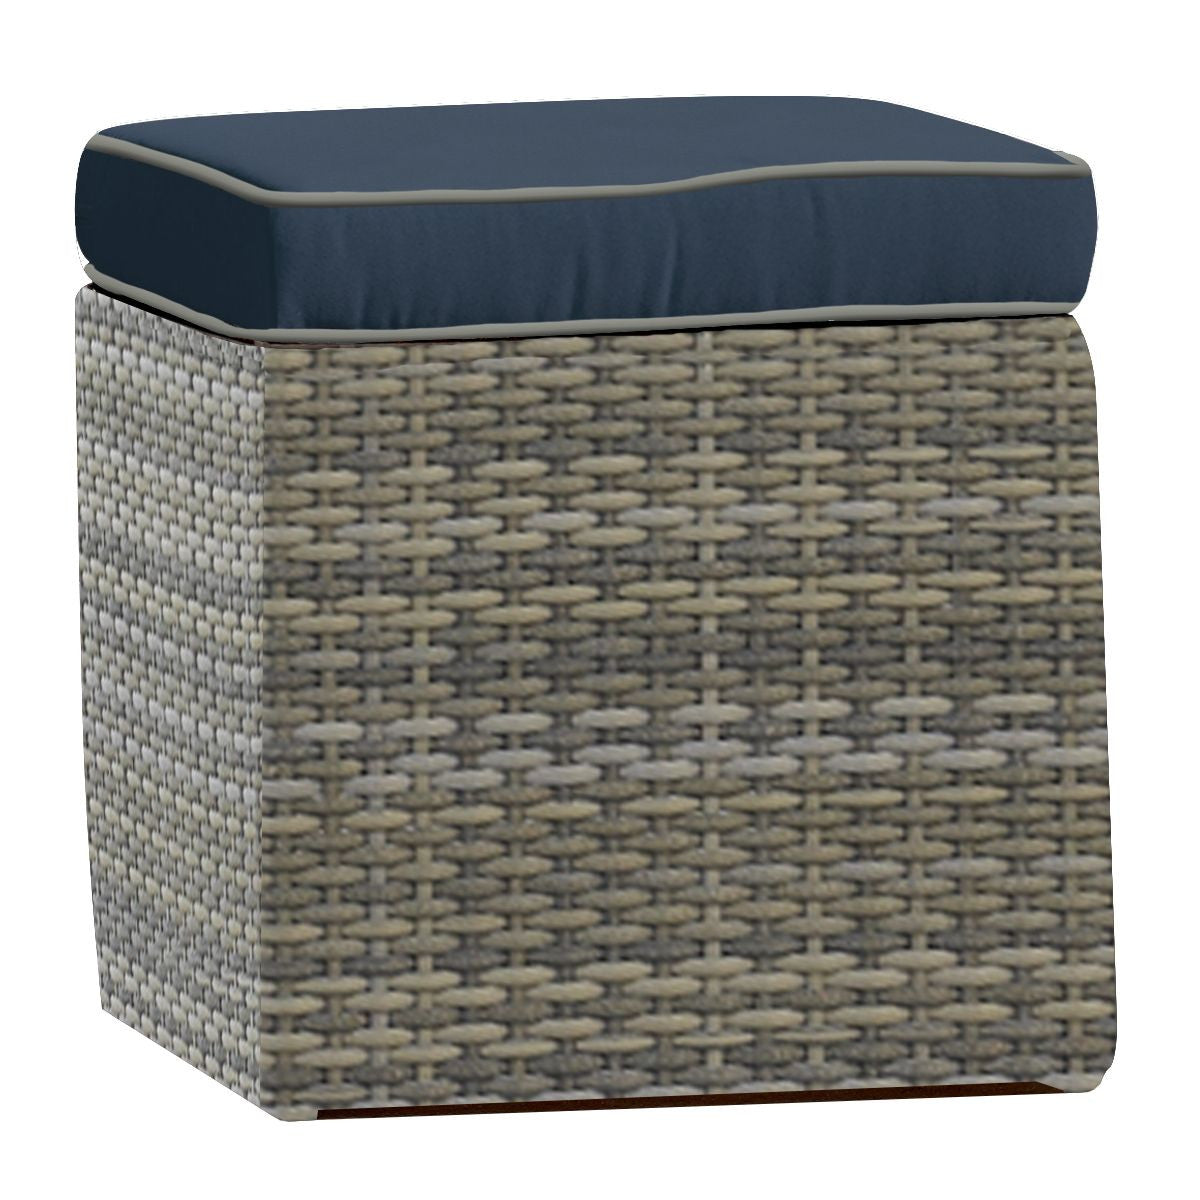 Forever Patio Universal Woven Cube Ottoman - Flat Weave